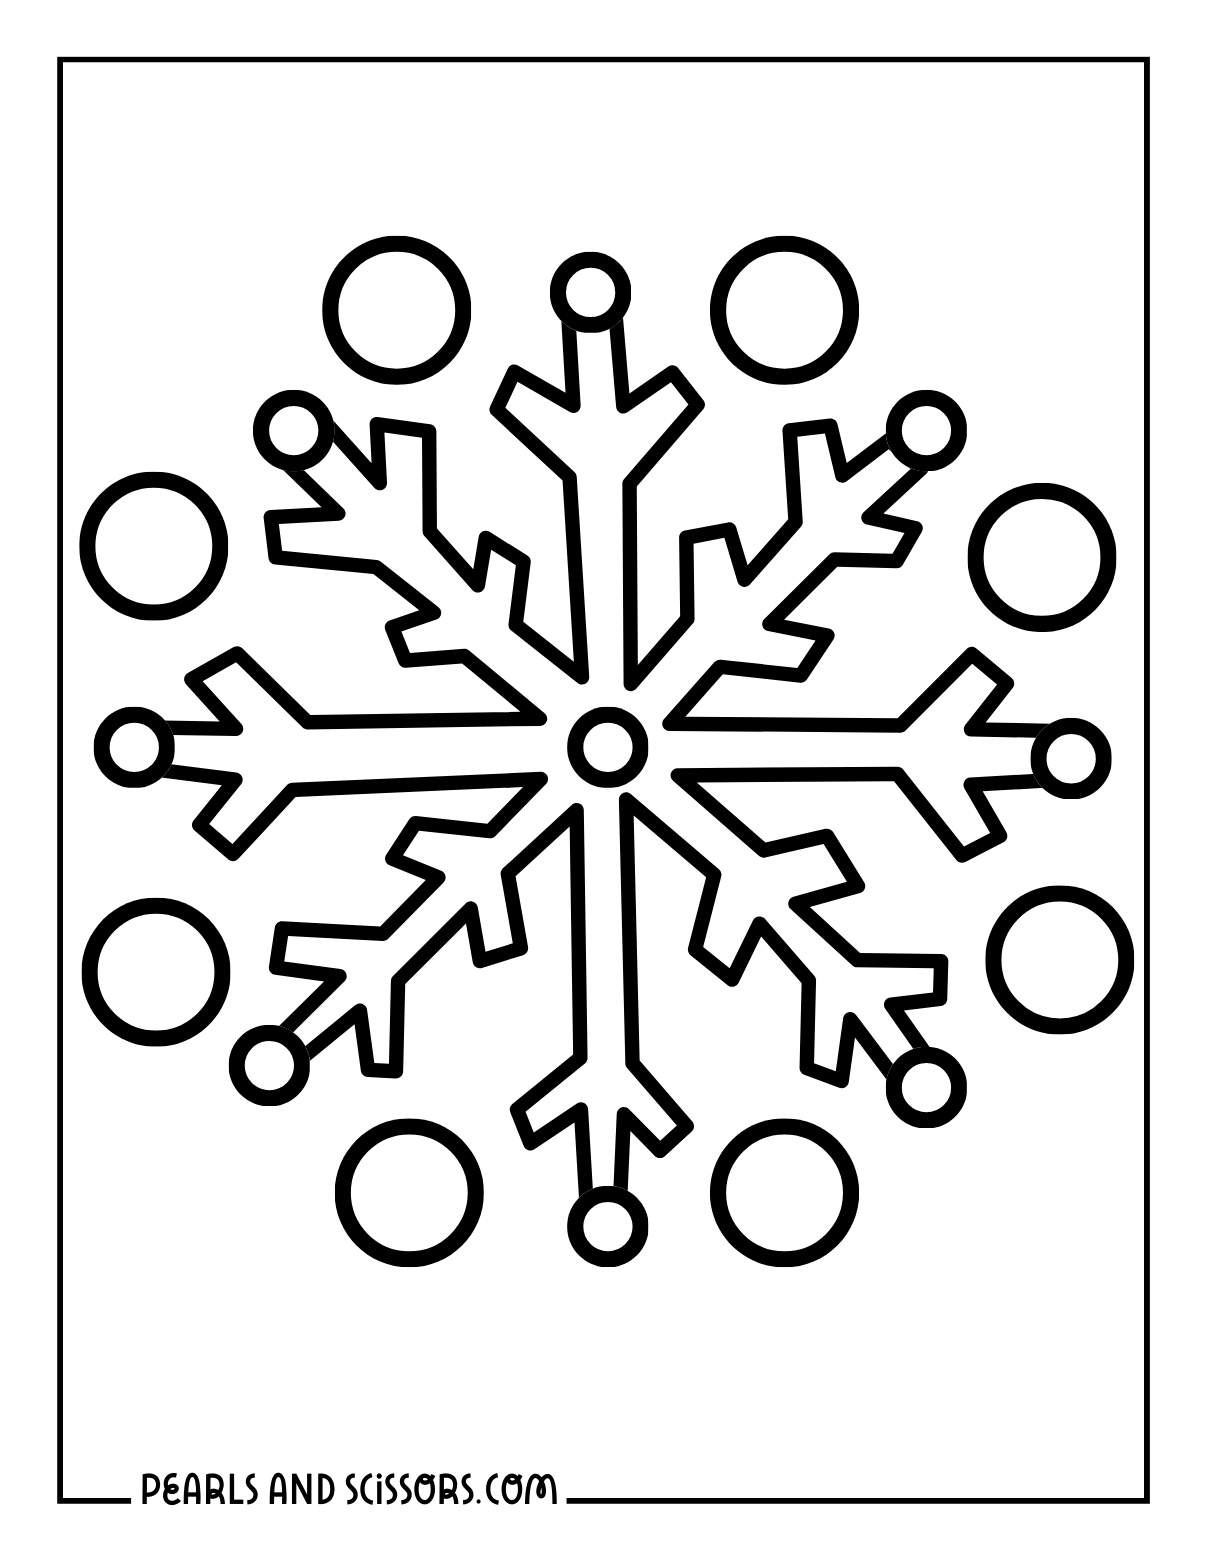 Simple snowflake coloring page for kids.